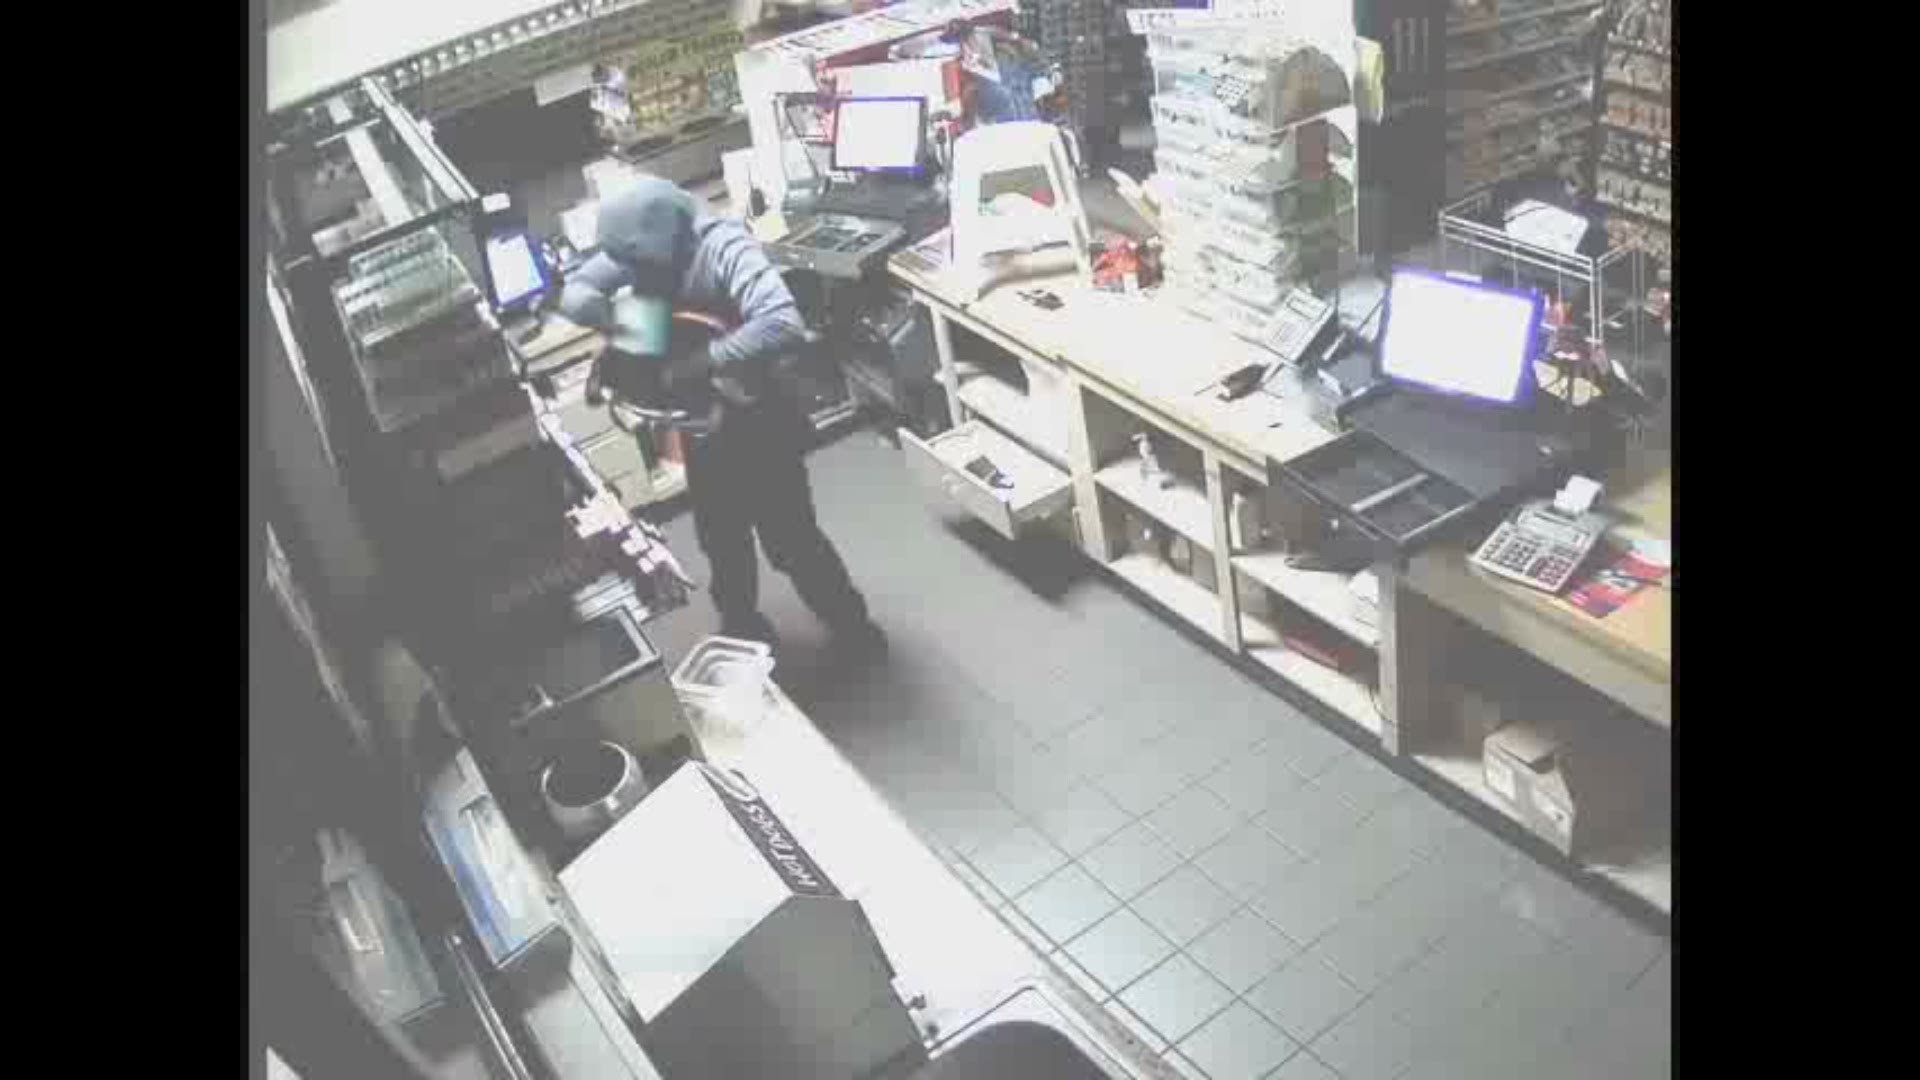 Deputies say the suspect shown in surveillance video stole more than $4,000 worth of cigarettes.